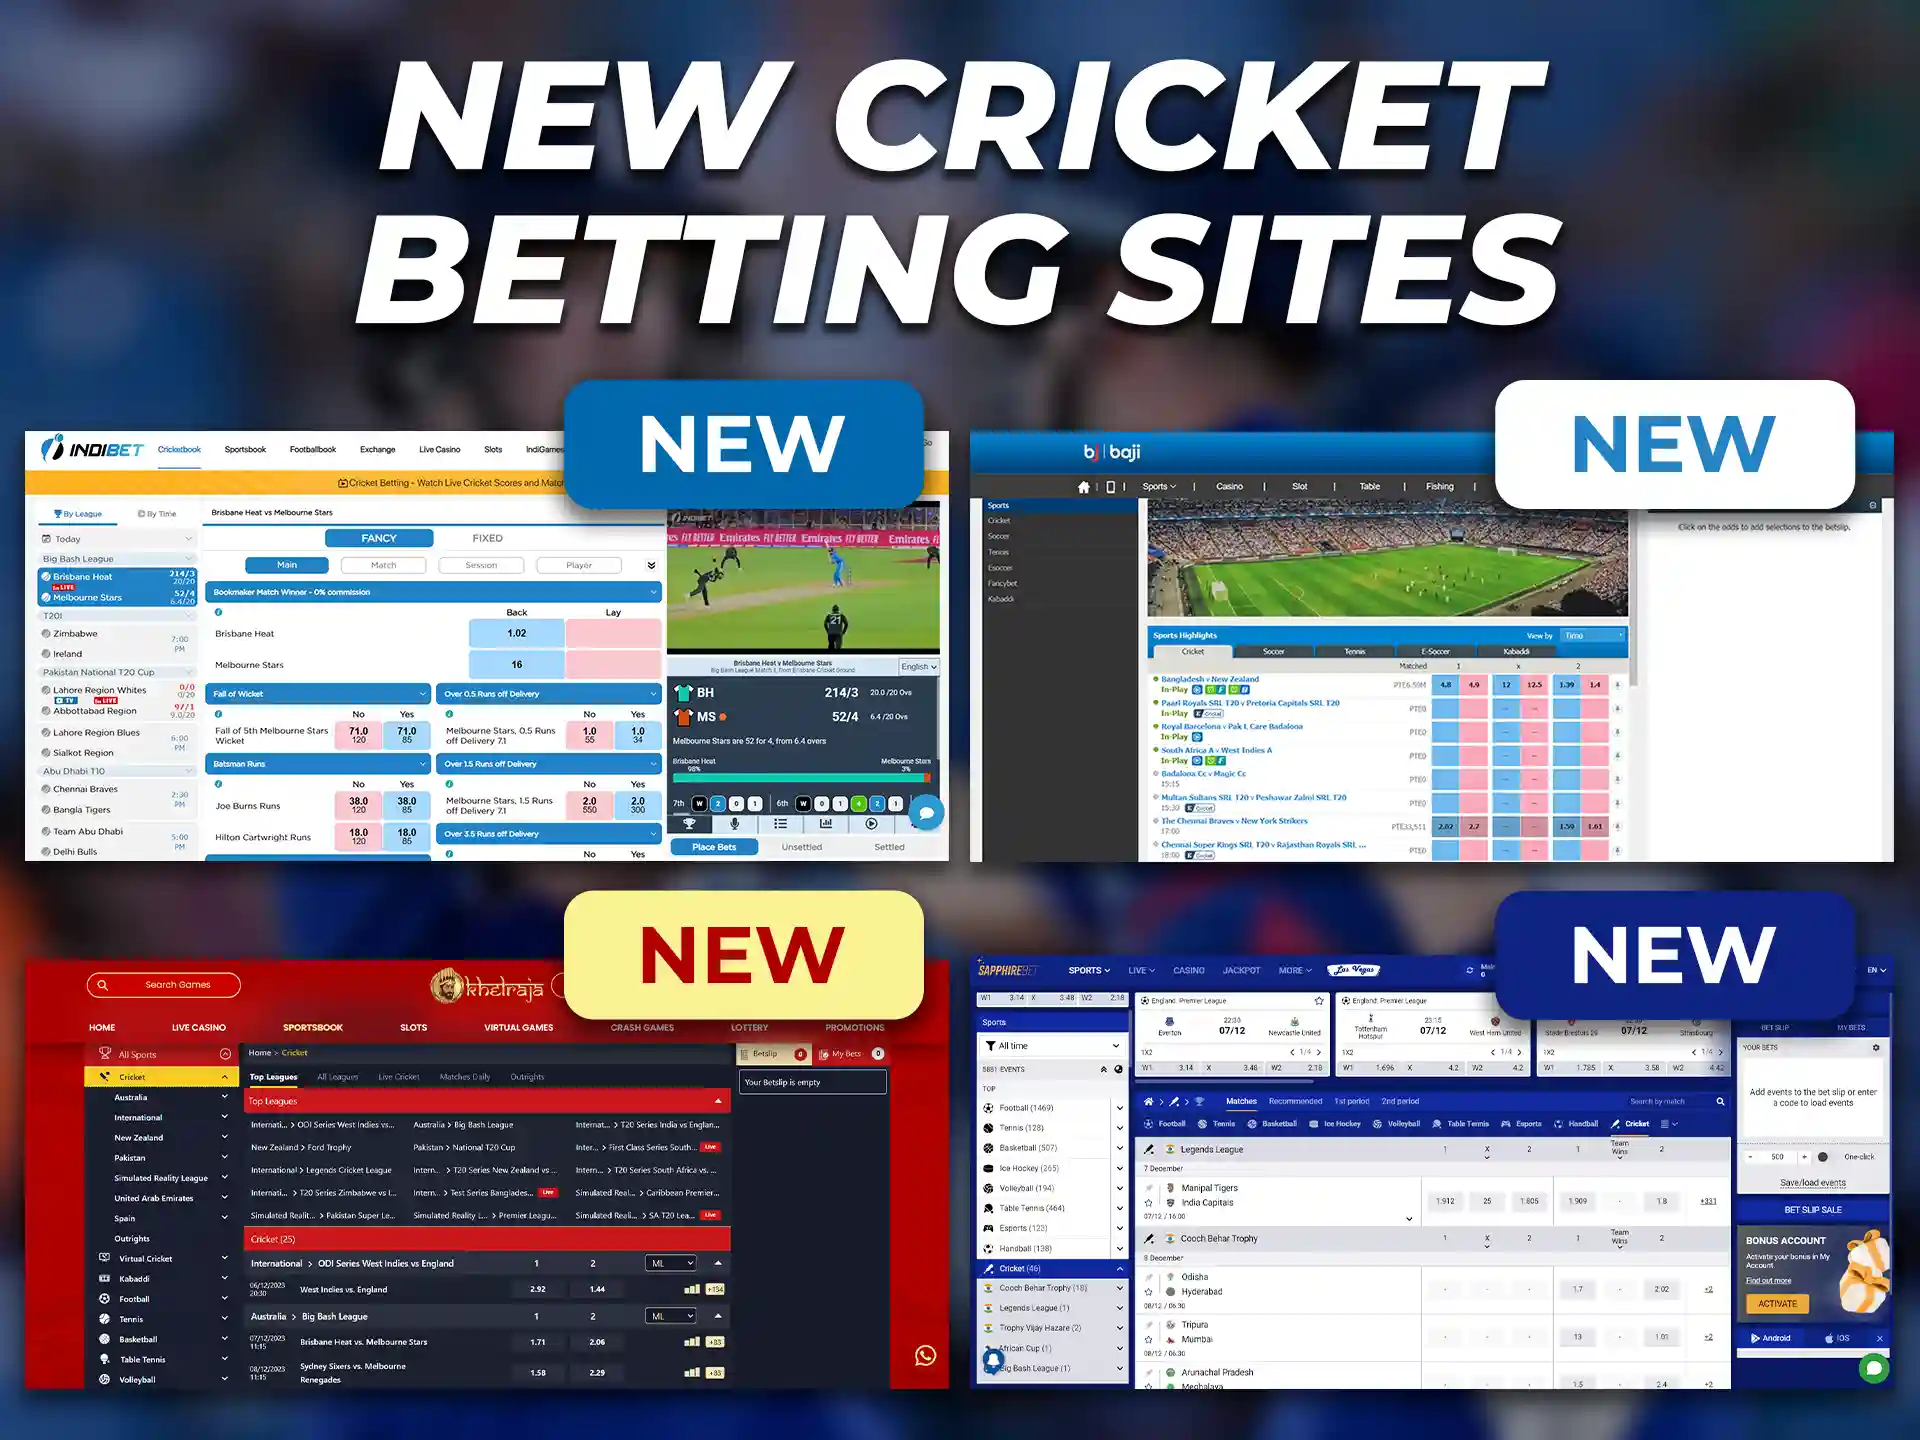 New cricket betting sites in India.